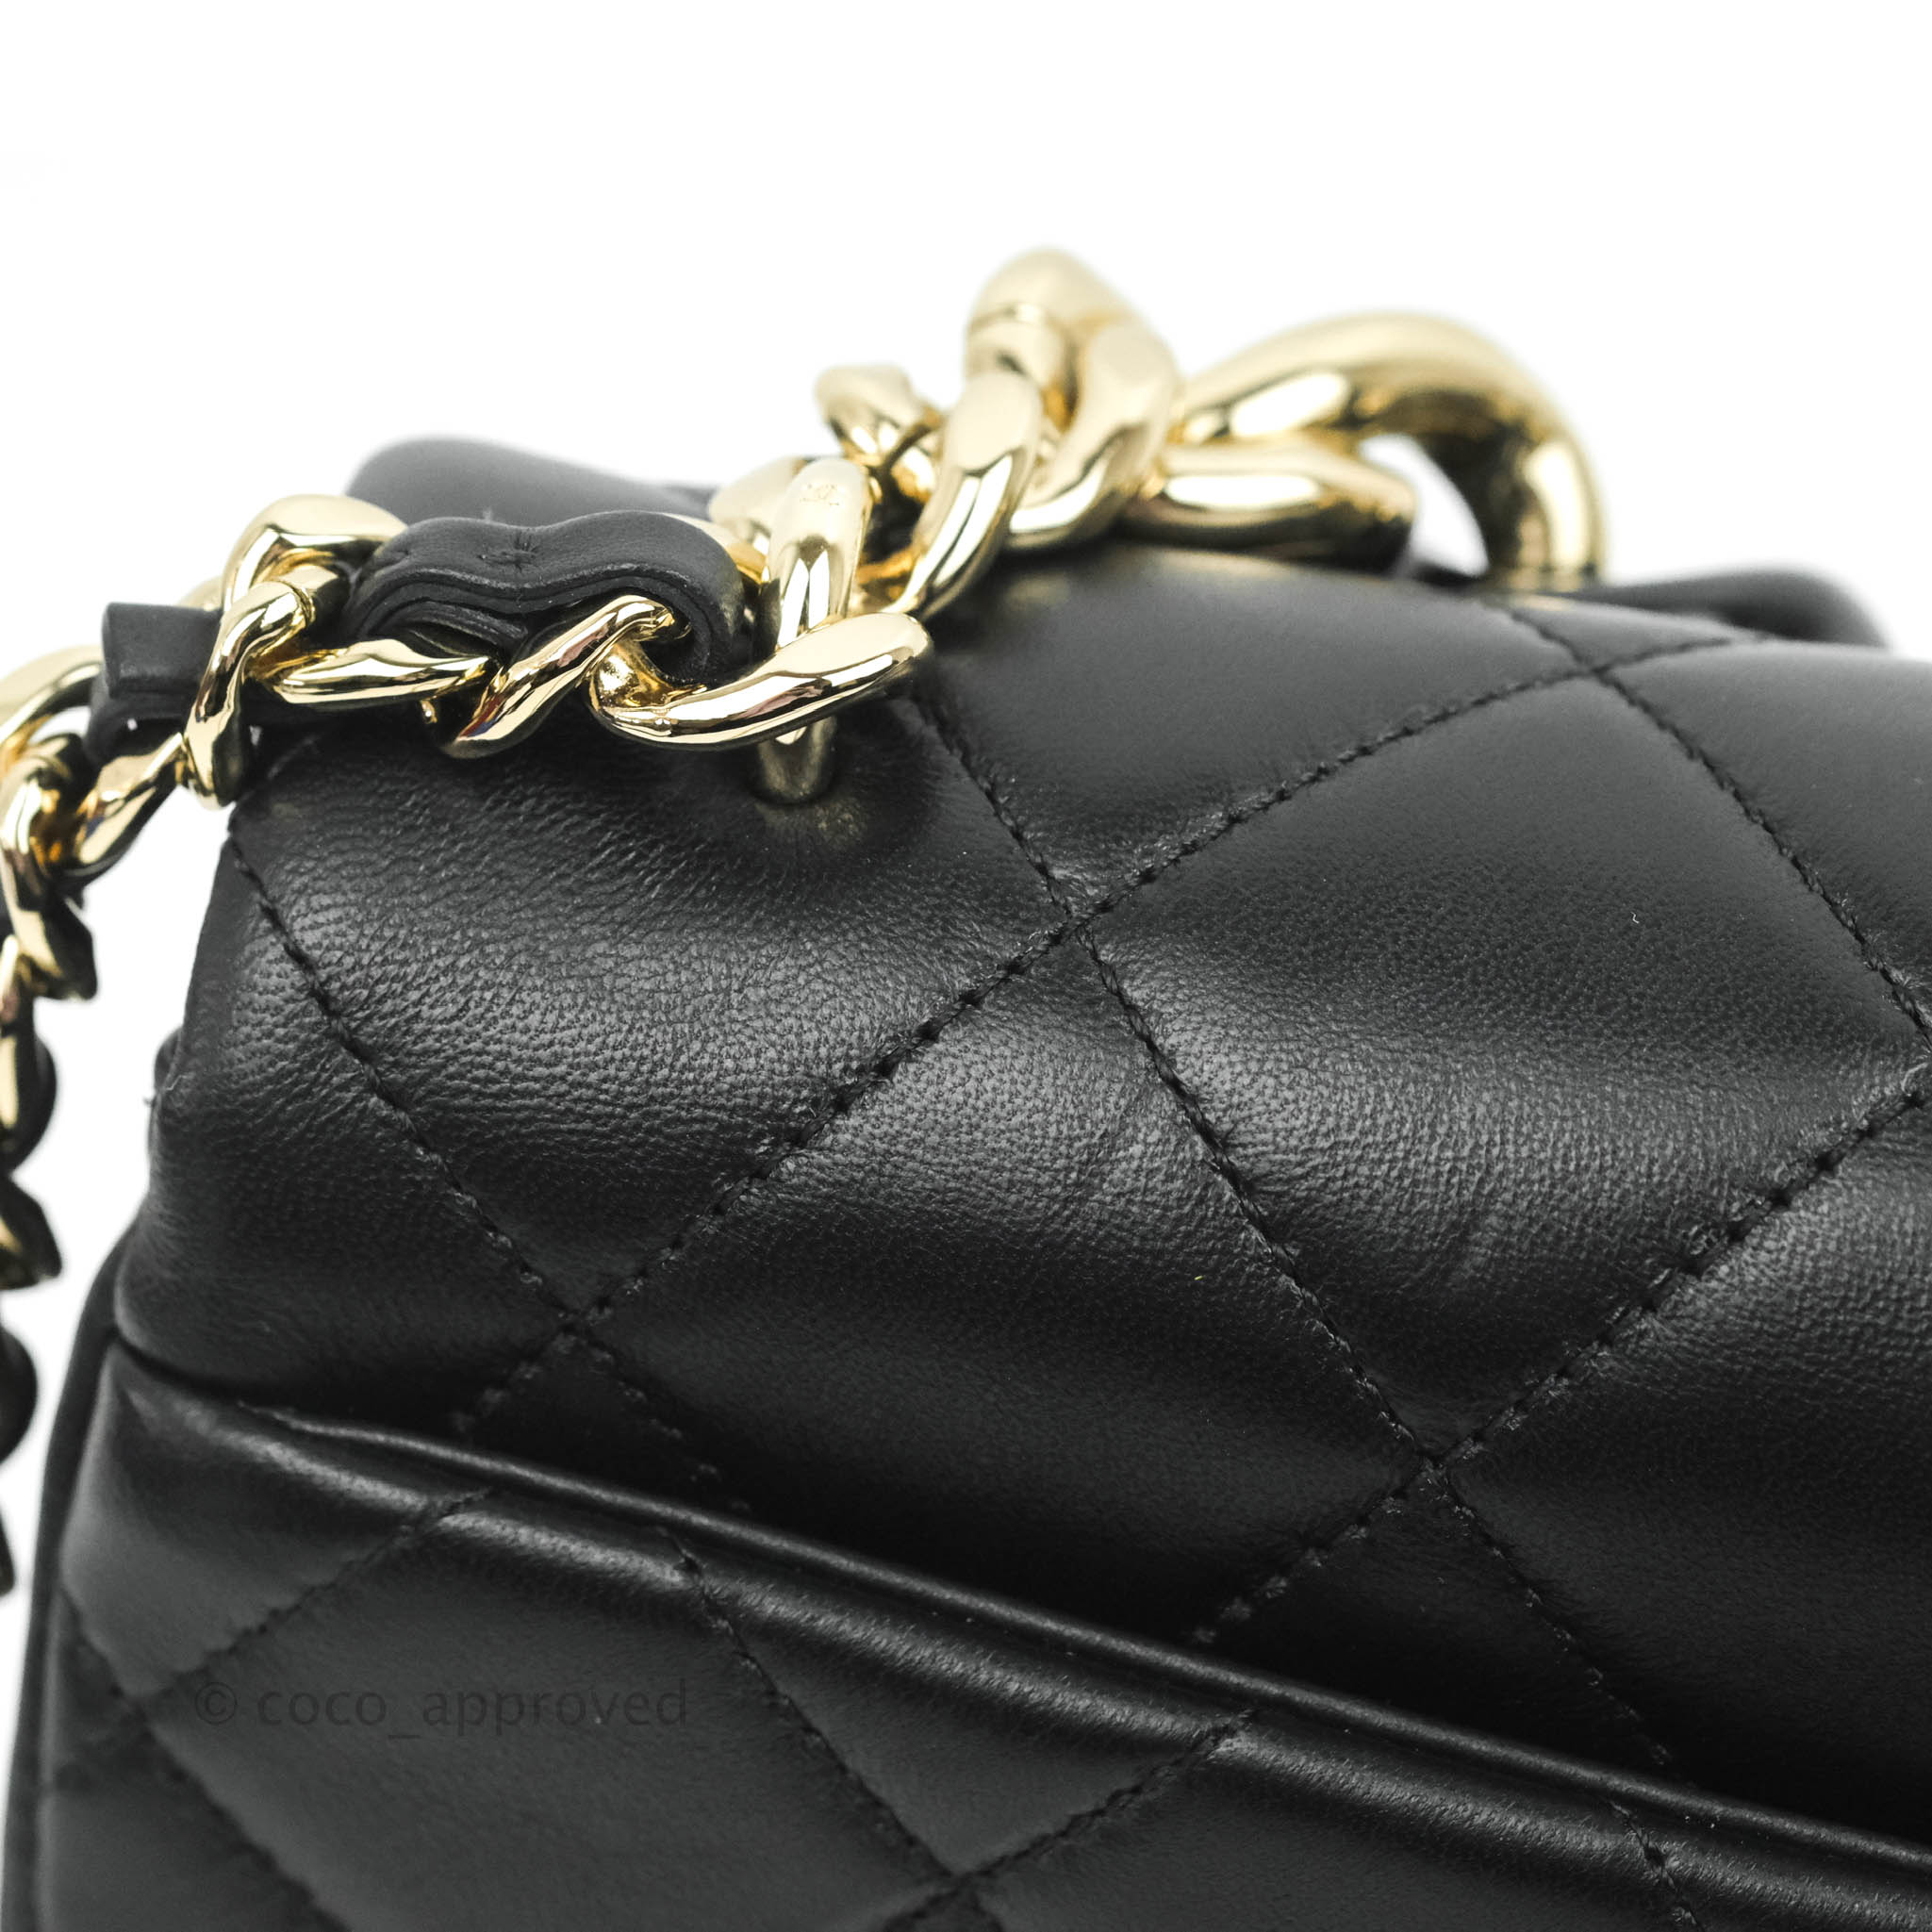 Chanel Black Lambskin and Ribbon Round Clutch with Chain Gold Hardware, 2021 (Like New), Black Womens Handbag